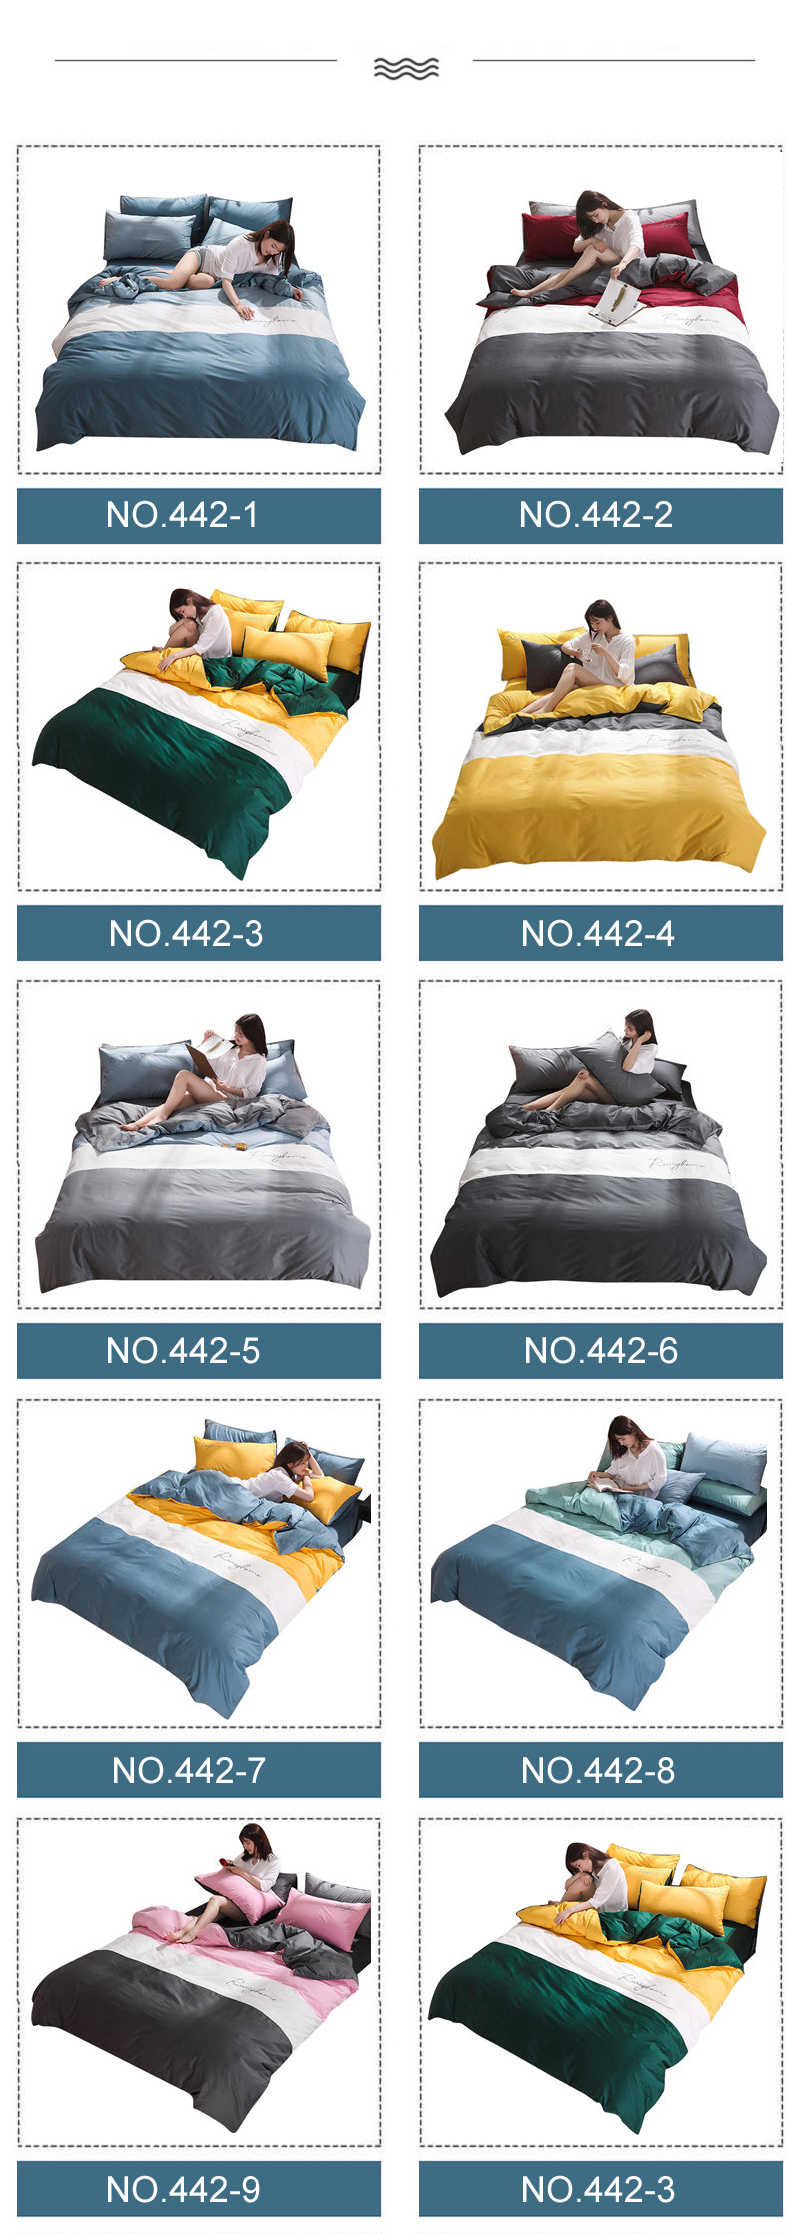 With LOGO Bed Sheet Set Wholesale